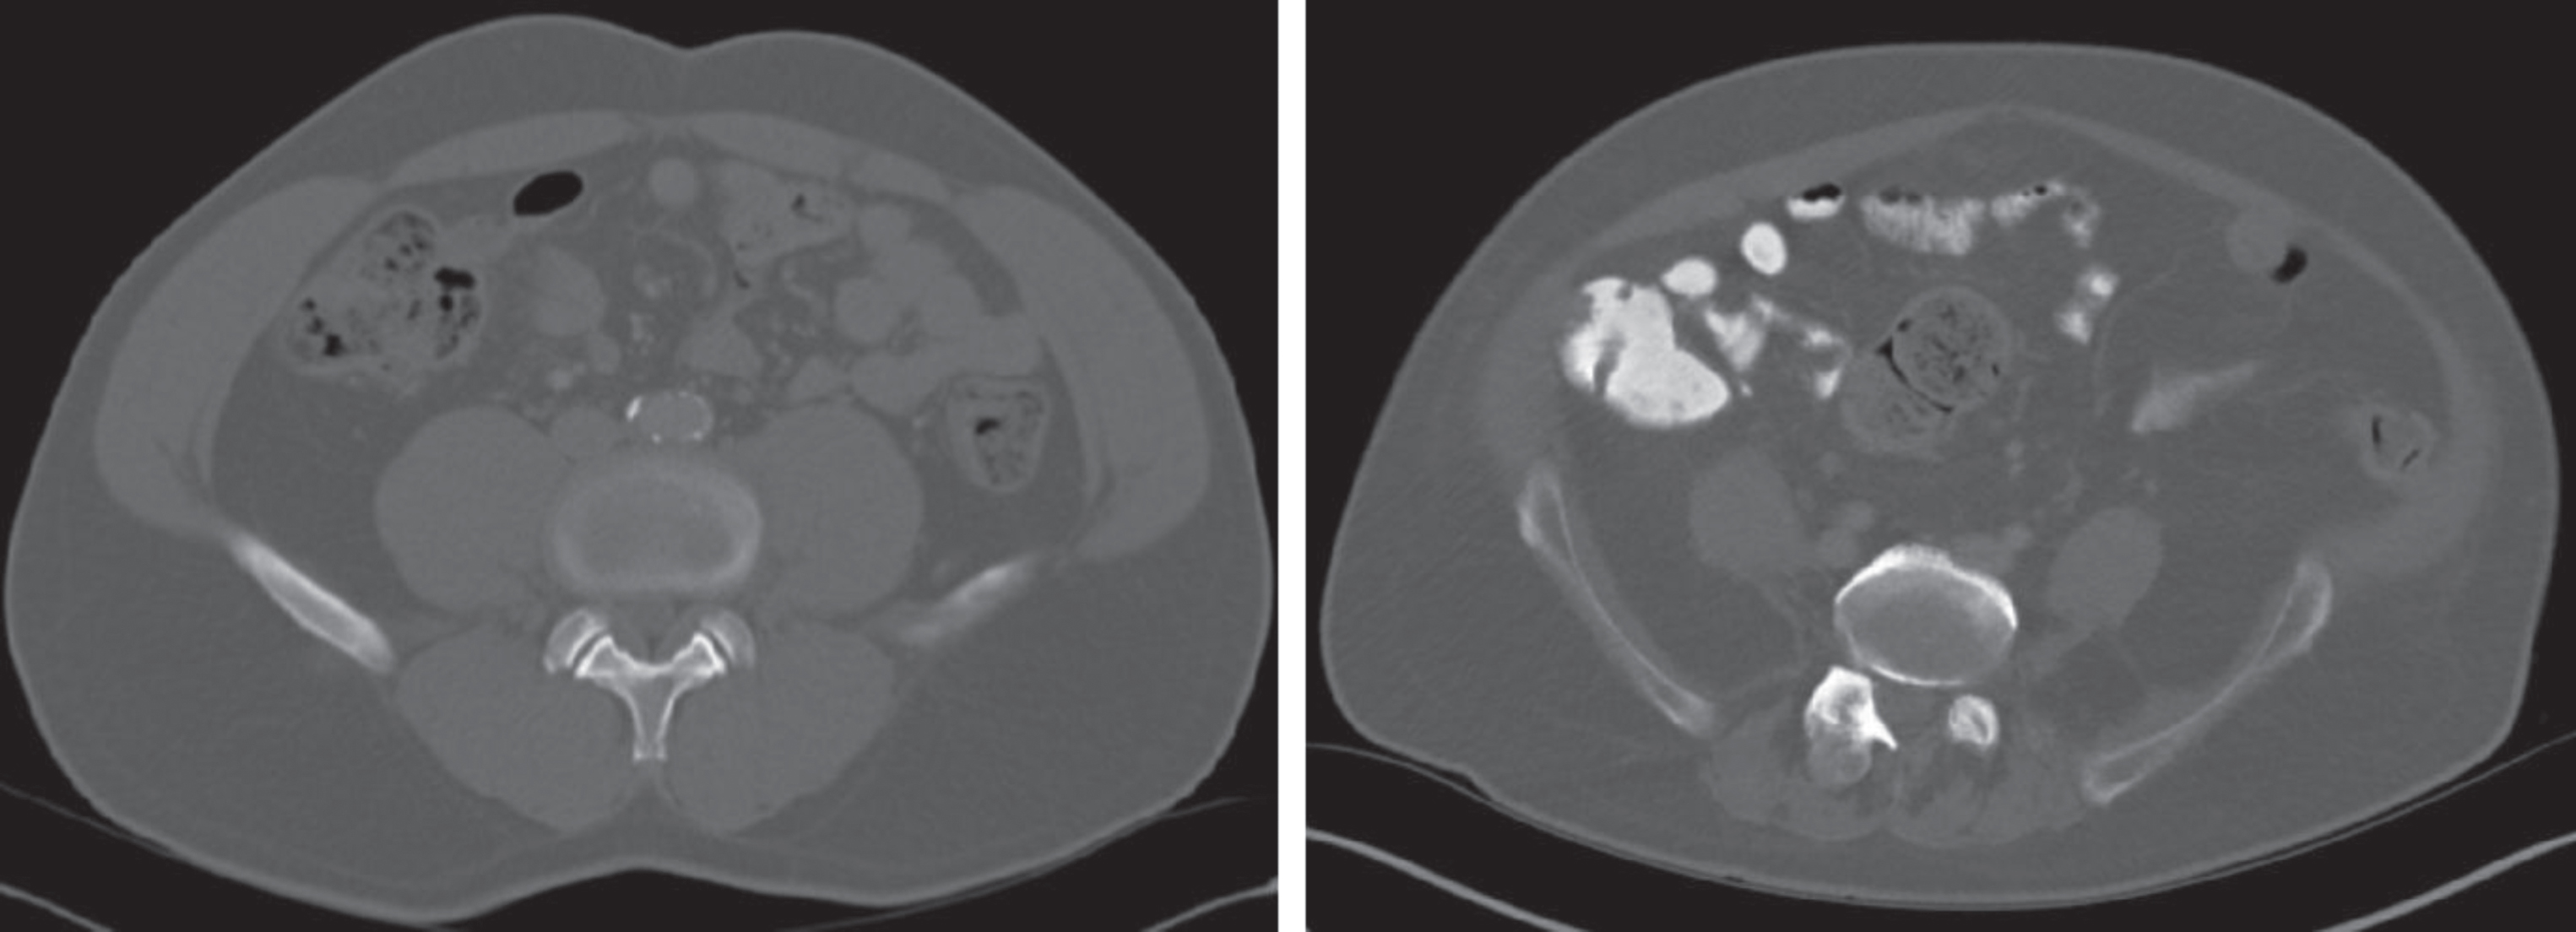 Variation in morphometric characteristics seen on pre-operative CT scan in two age-matched males of similar size, with similar comorbid conditions. CT on the left demonstrating high psoas muscle area, CT on the right demonstrating low psoas muscle area, both with respect to the mean.